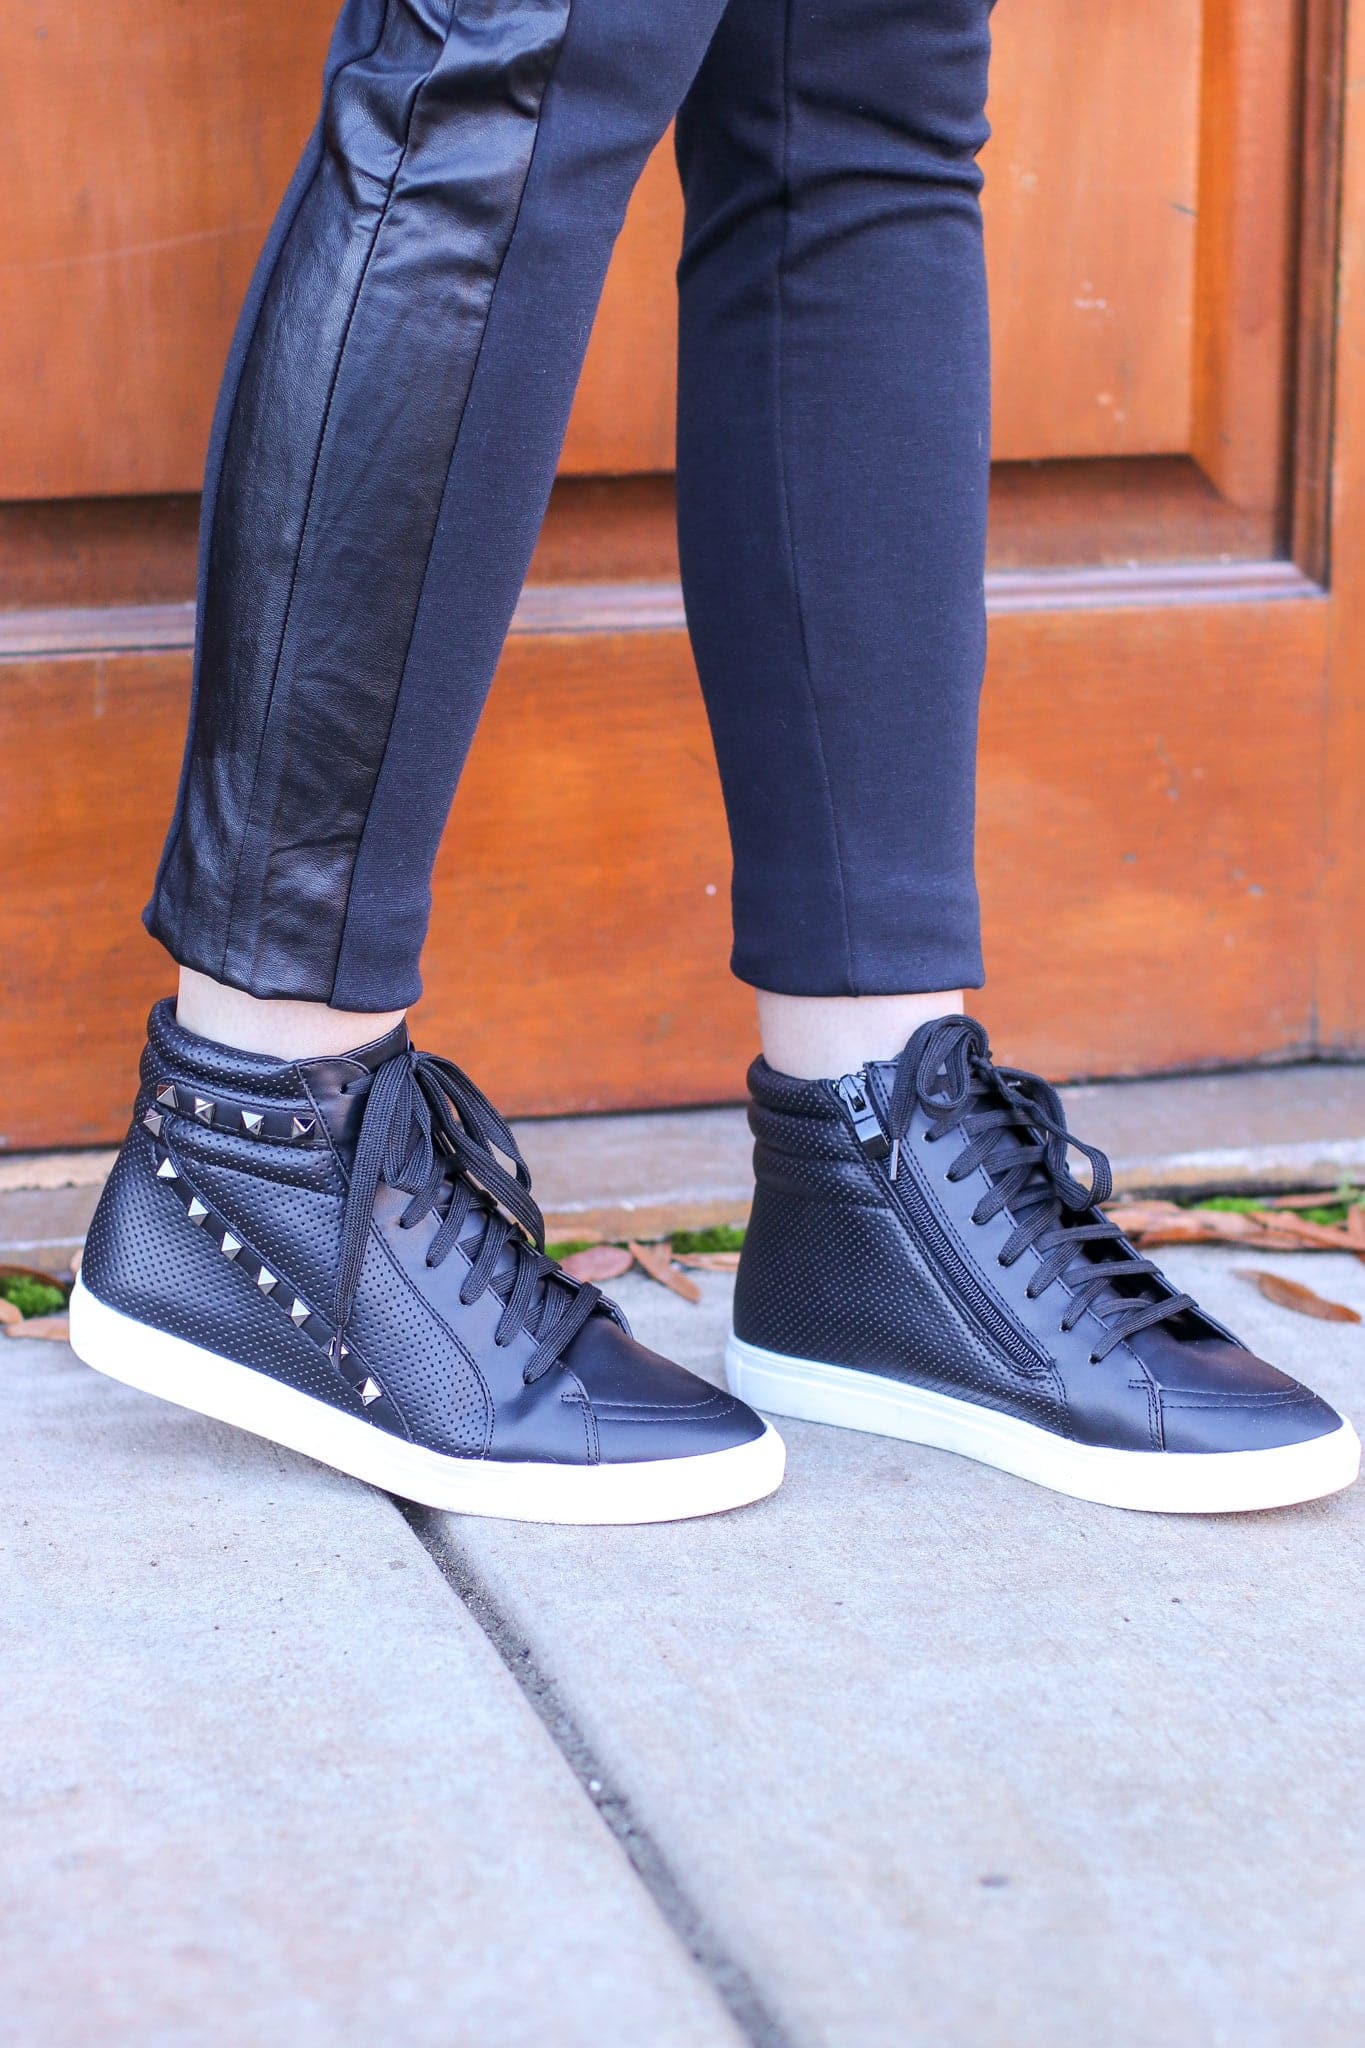 Black / 5 Lex Studded High Top Wedge Sneakers - FINAL SALE - Madison and Mallory